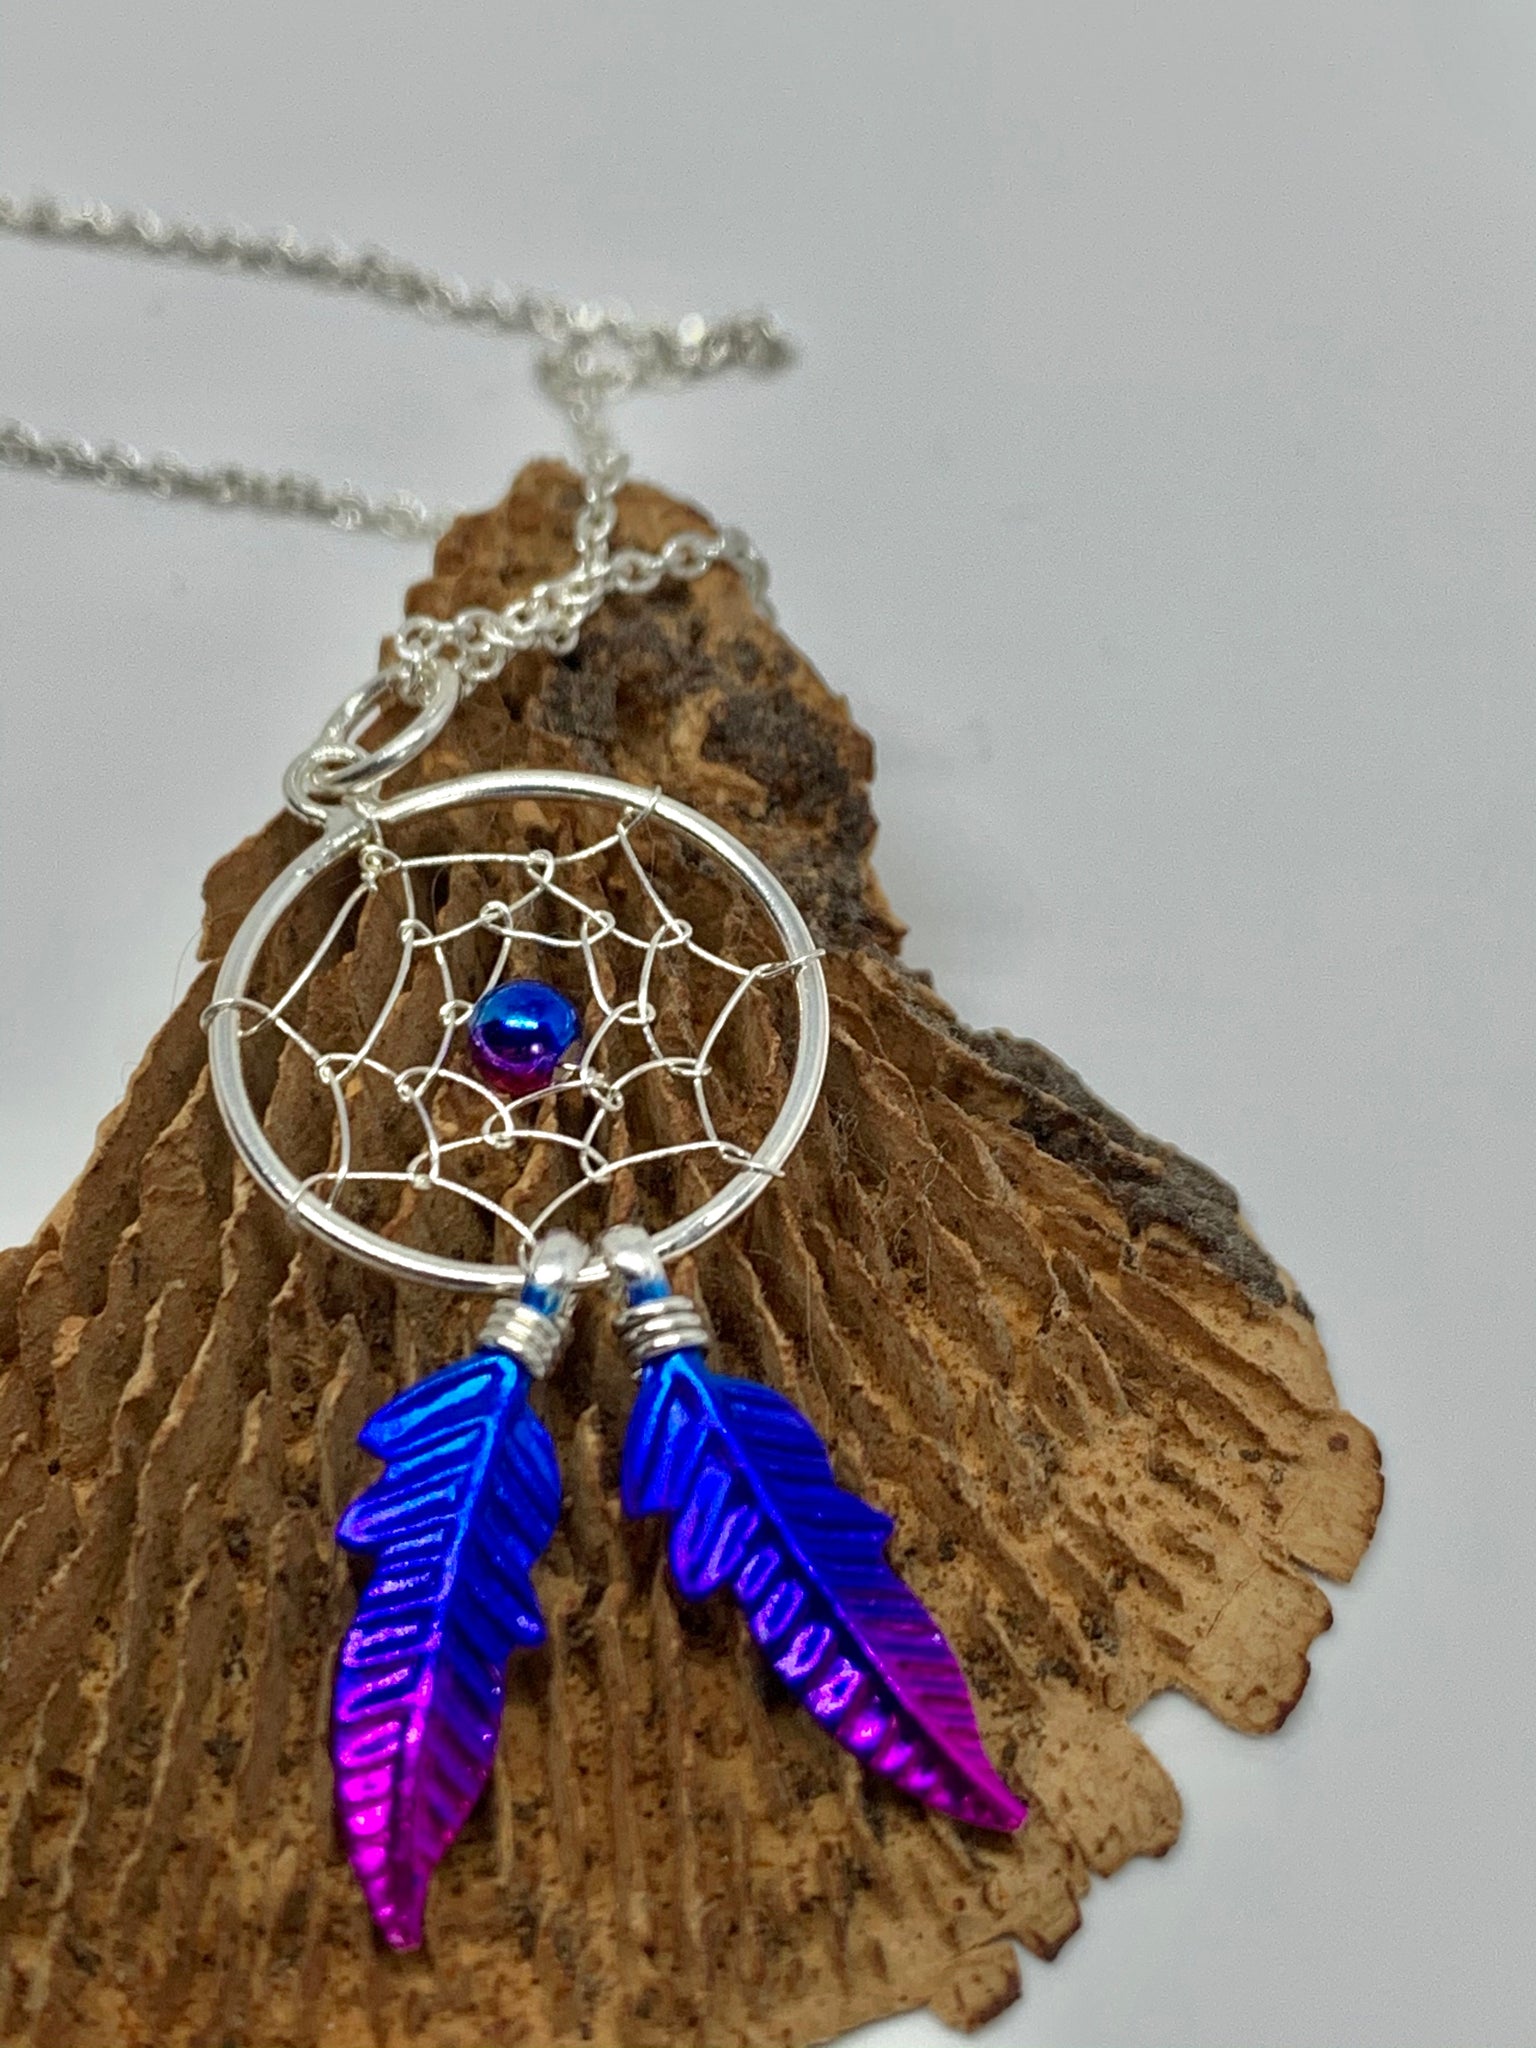 Dreamcatcher Necklace from Pixi Daisy